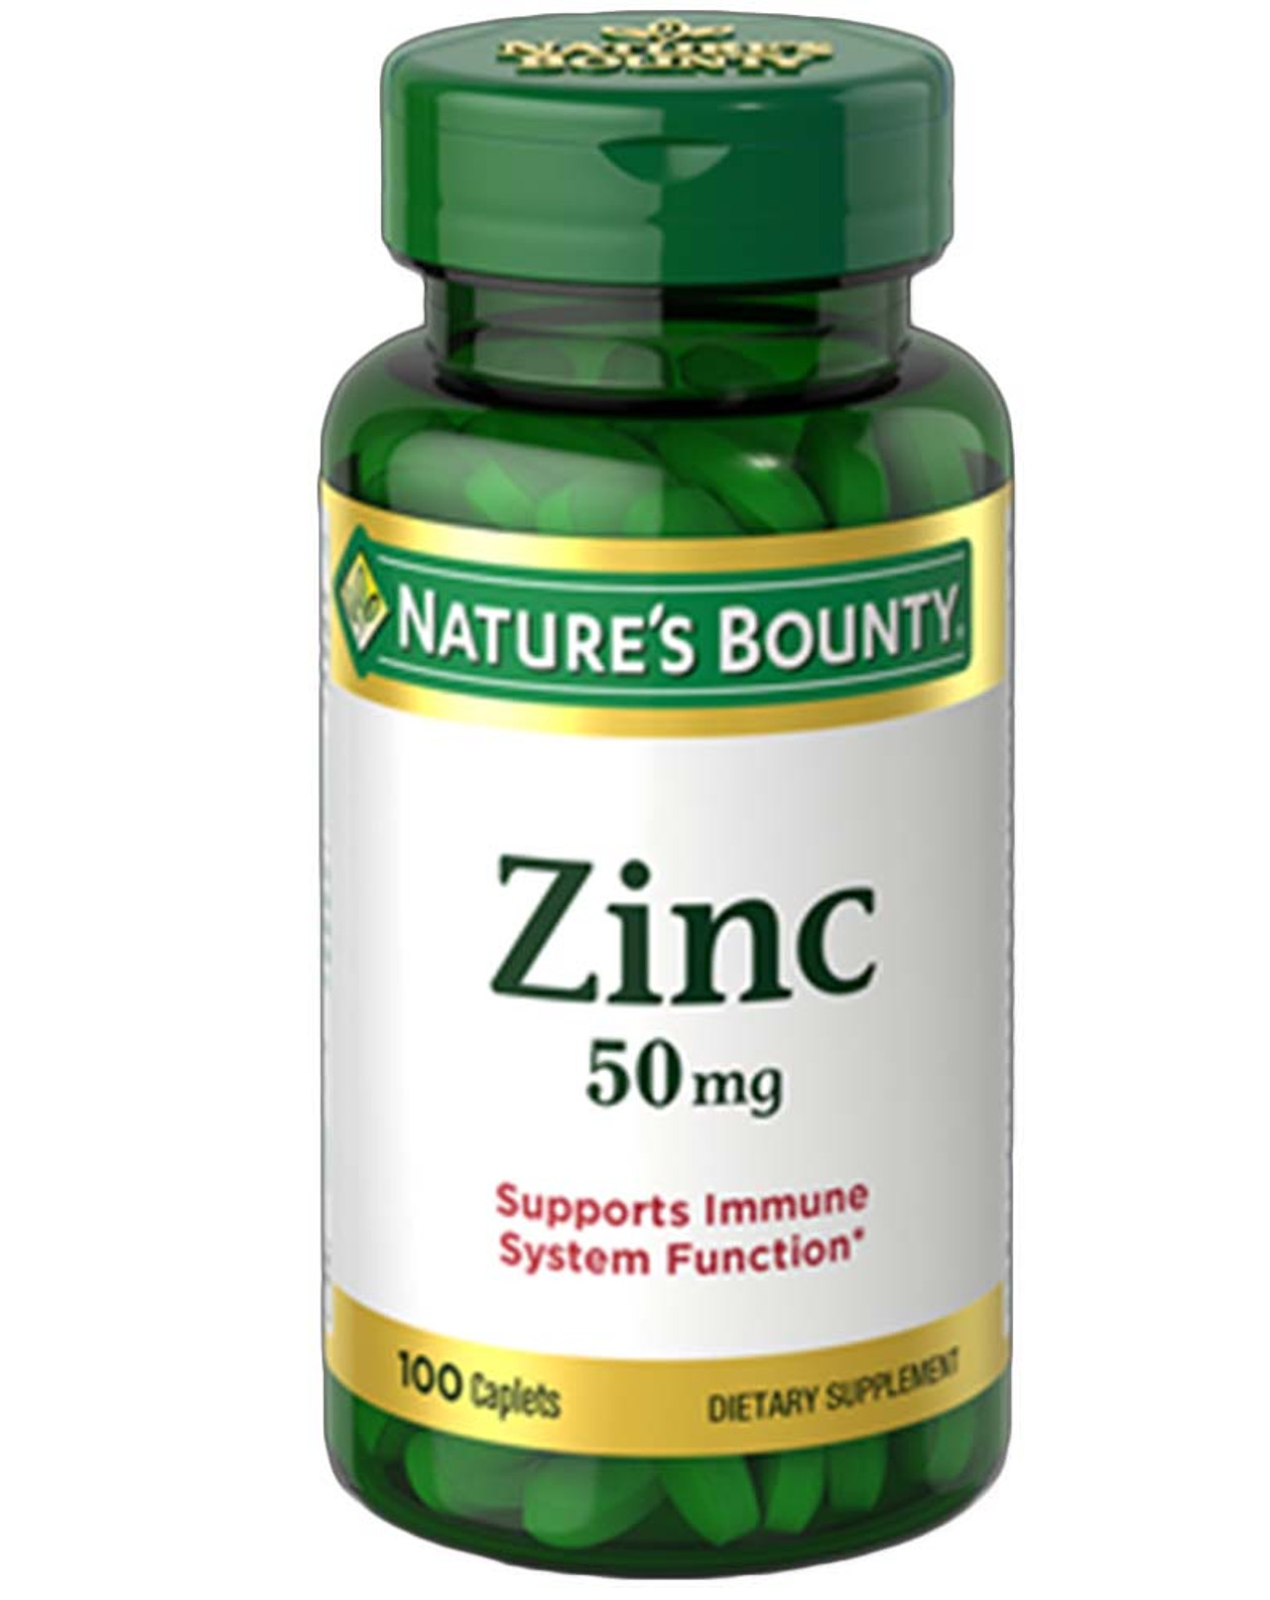 Taking zinc for cold & flu prevention